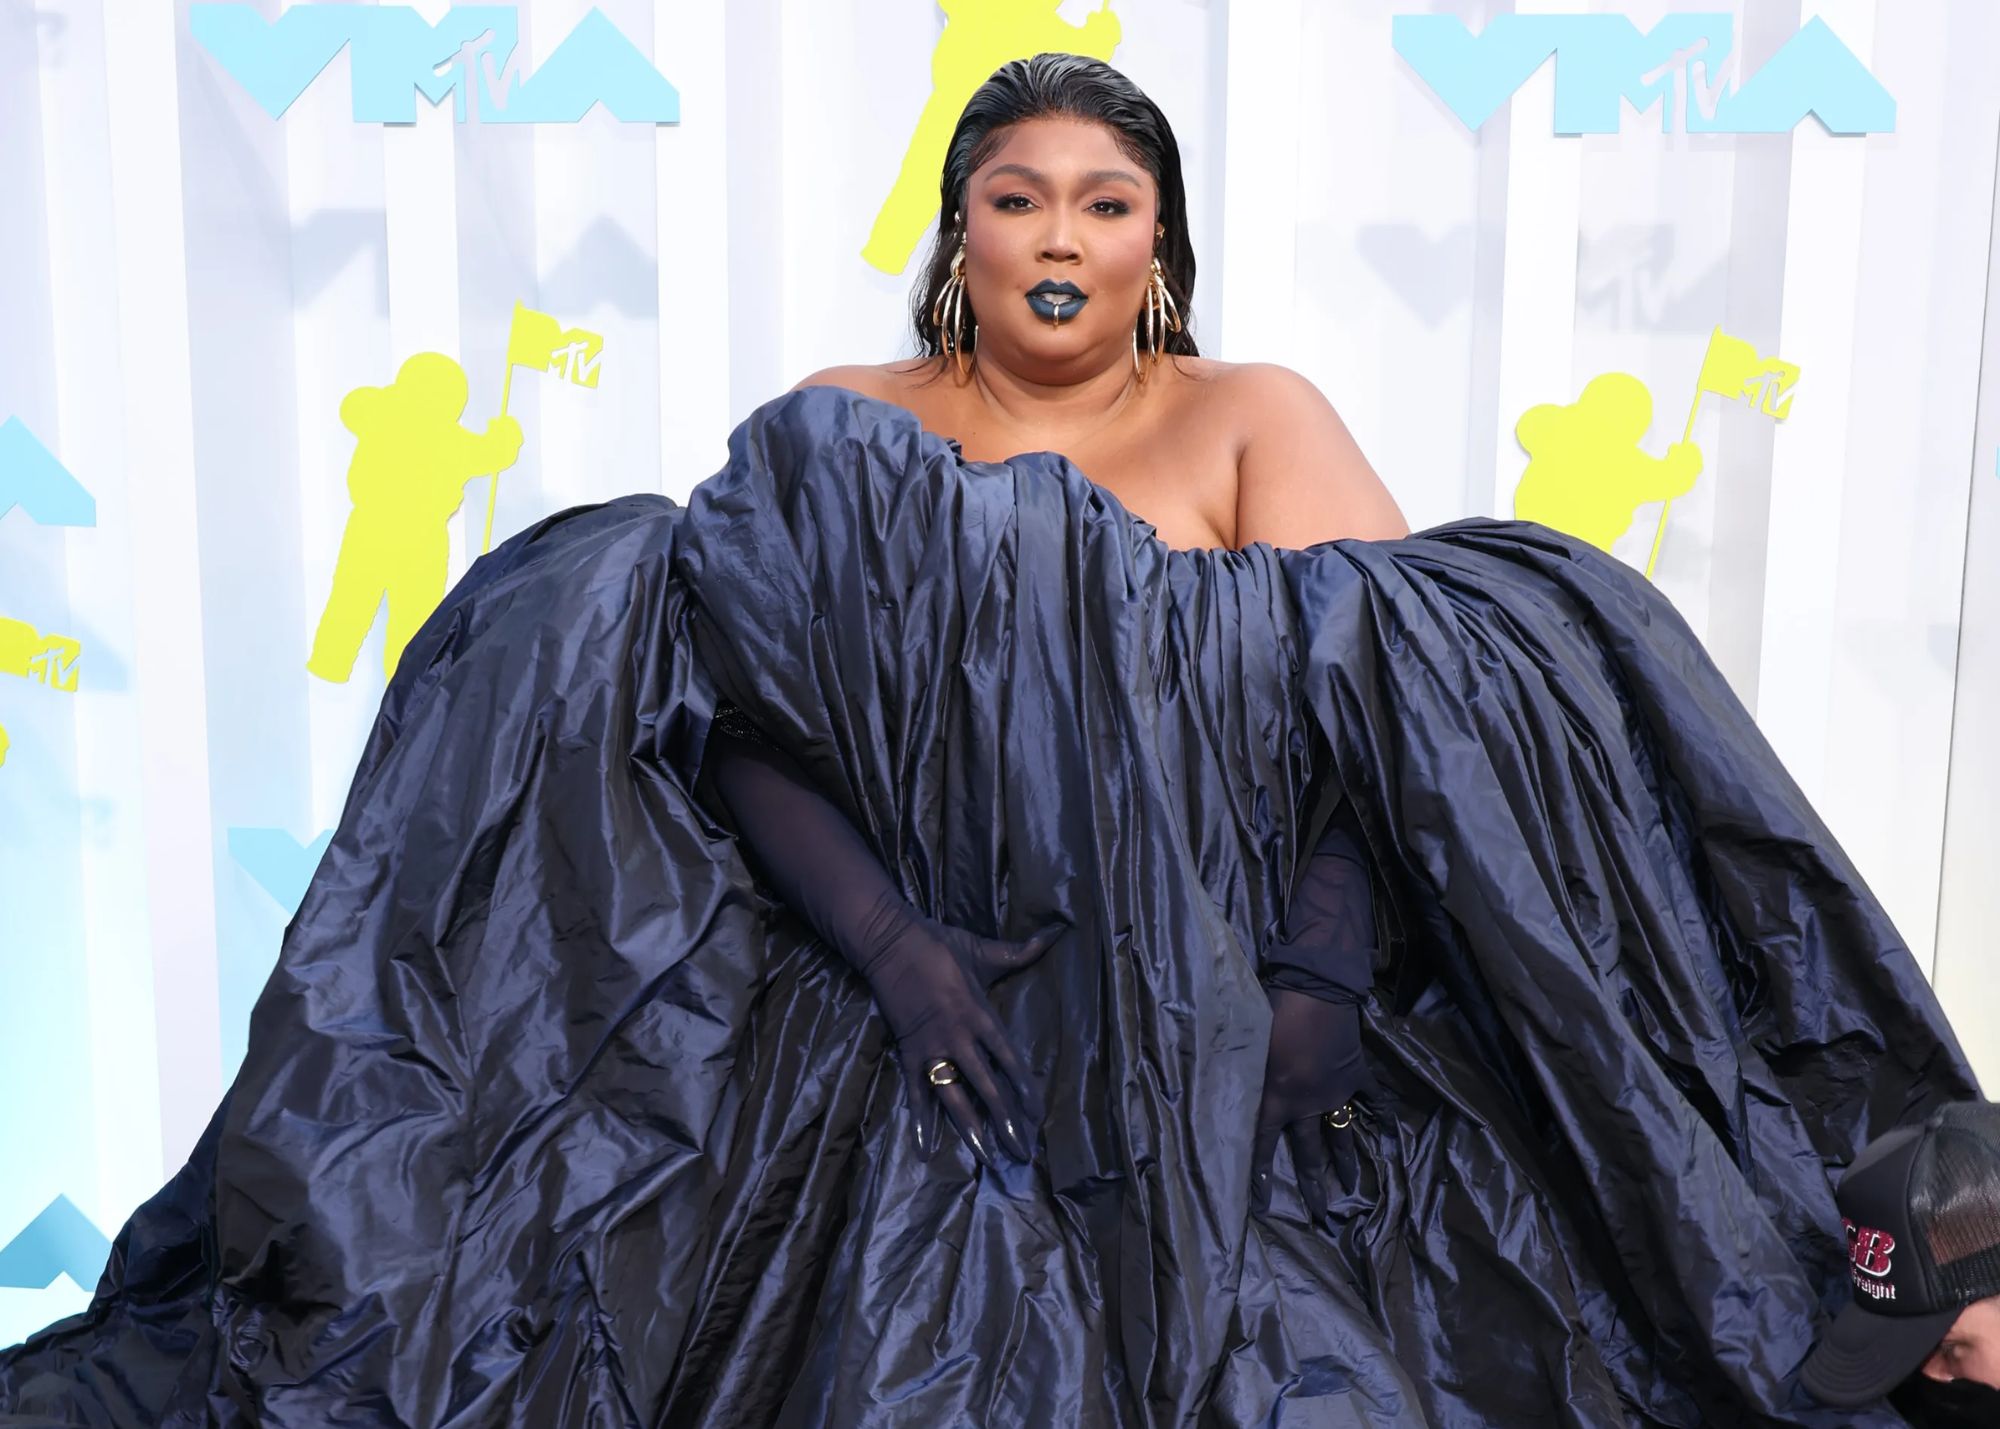 At the 2022 VMAs, Lizzo wore a gargantuan navy blue gown with a lip ring